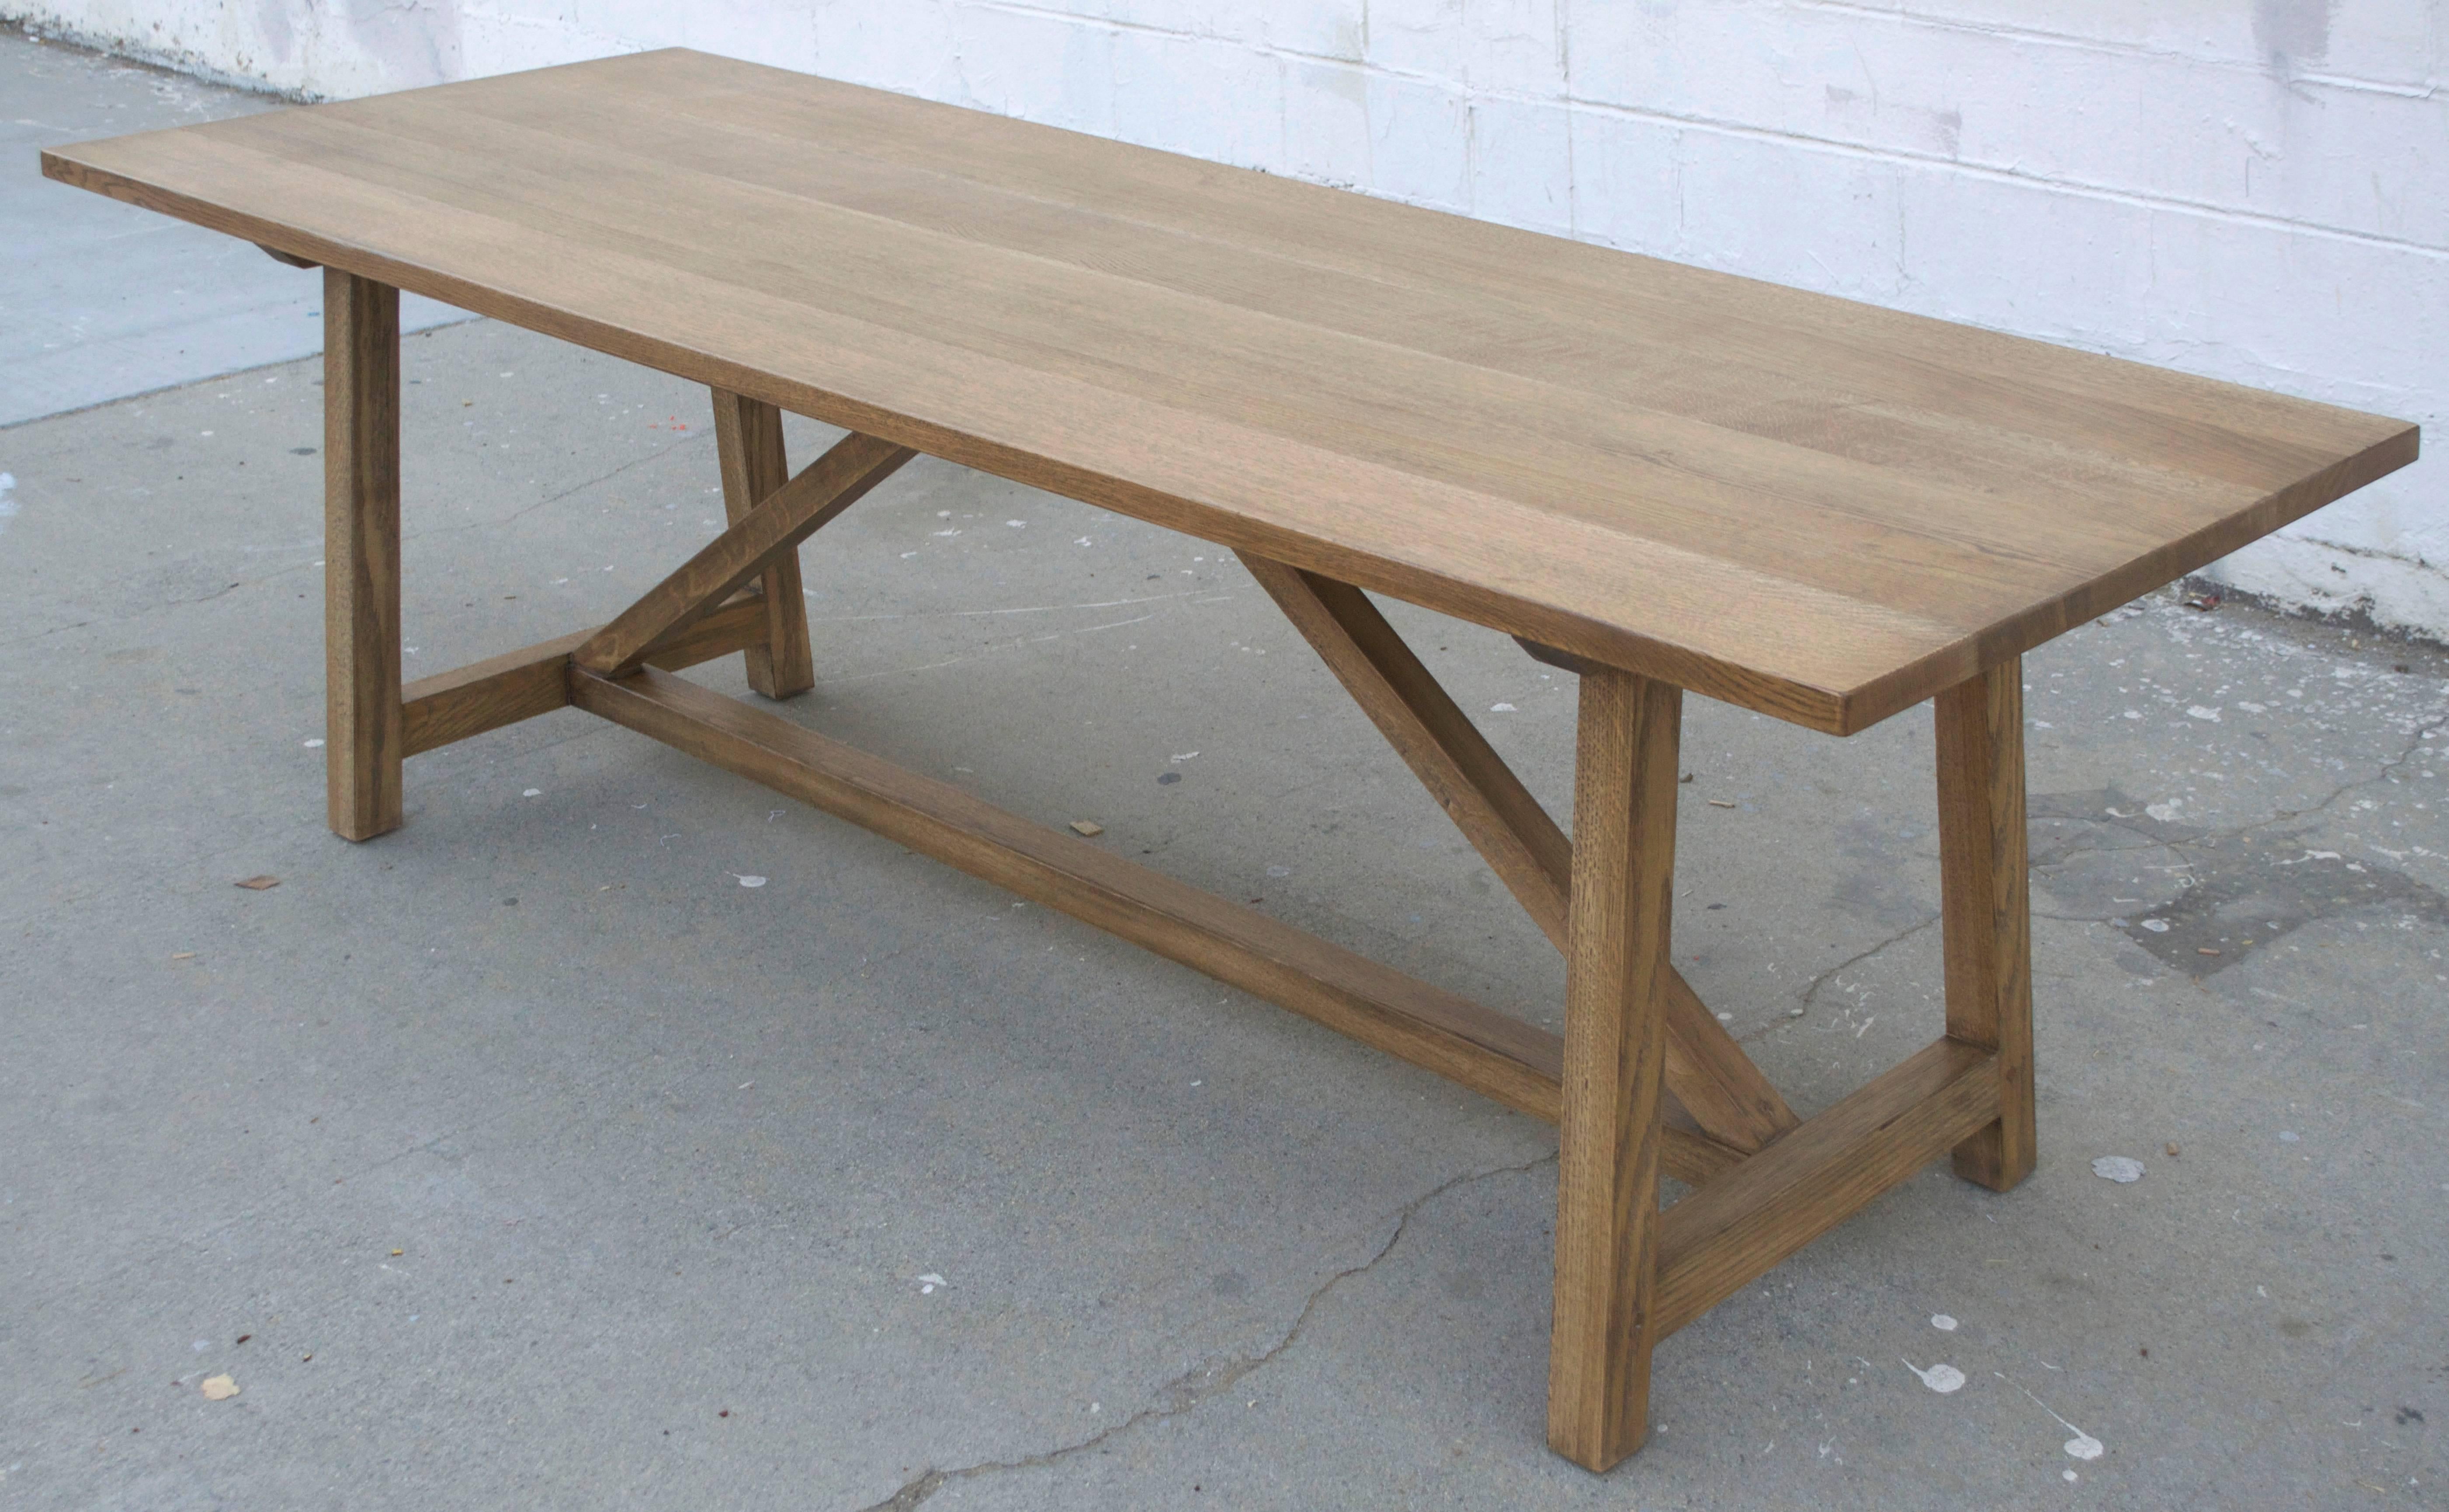 Custom dining table in distressed, rift-sawn, white oak. 

Because each table is bench-made in our own Los Angeles workshop you can influence all aspects of design, including size, wood species and finish. We use only traditional carpentry